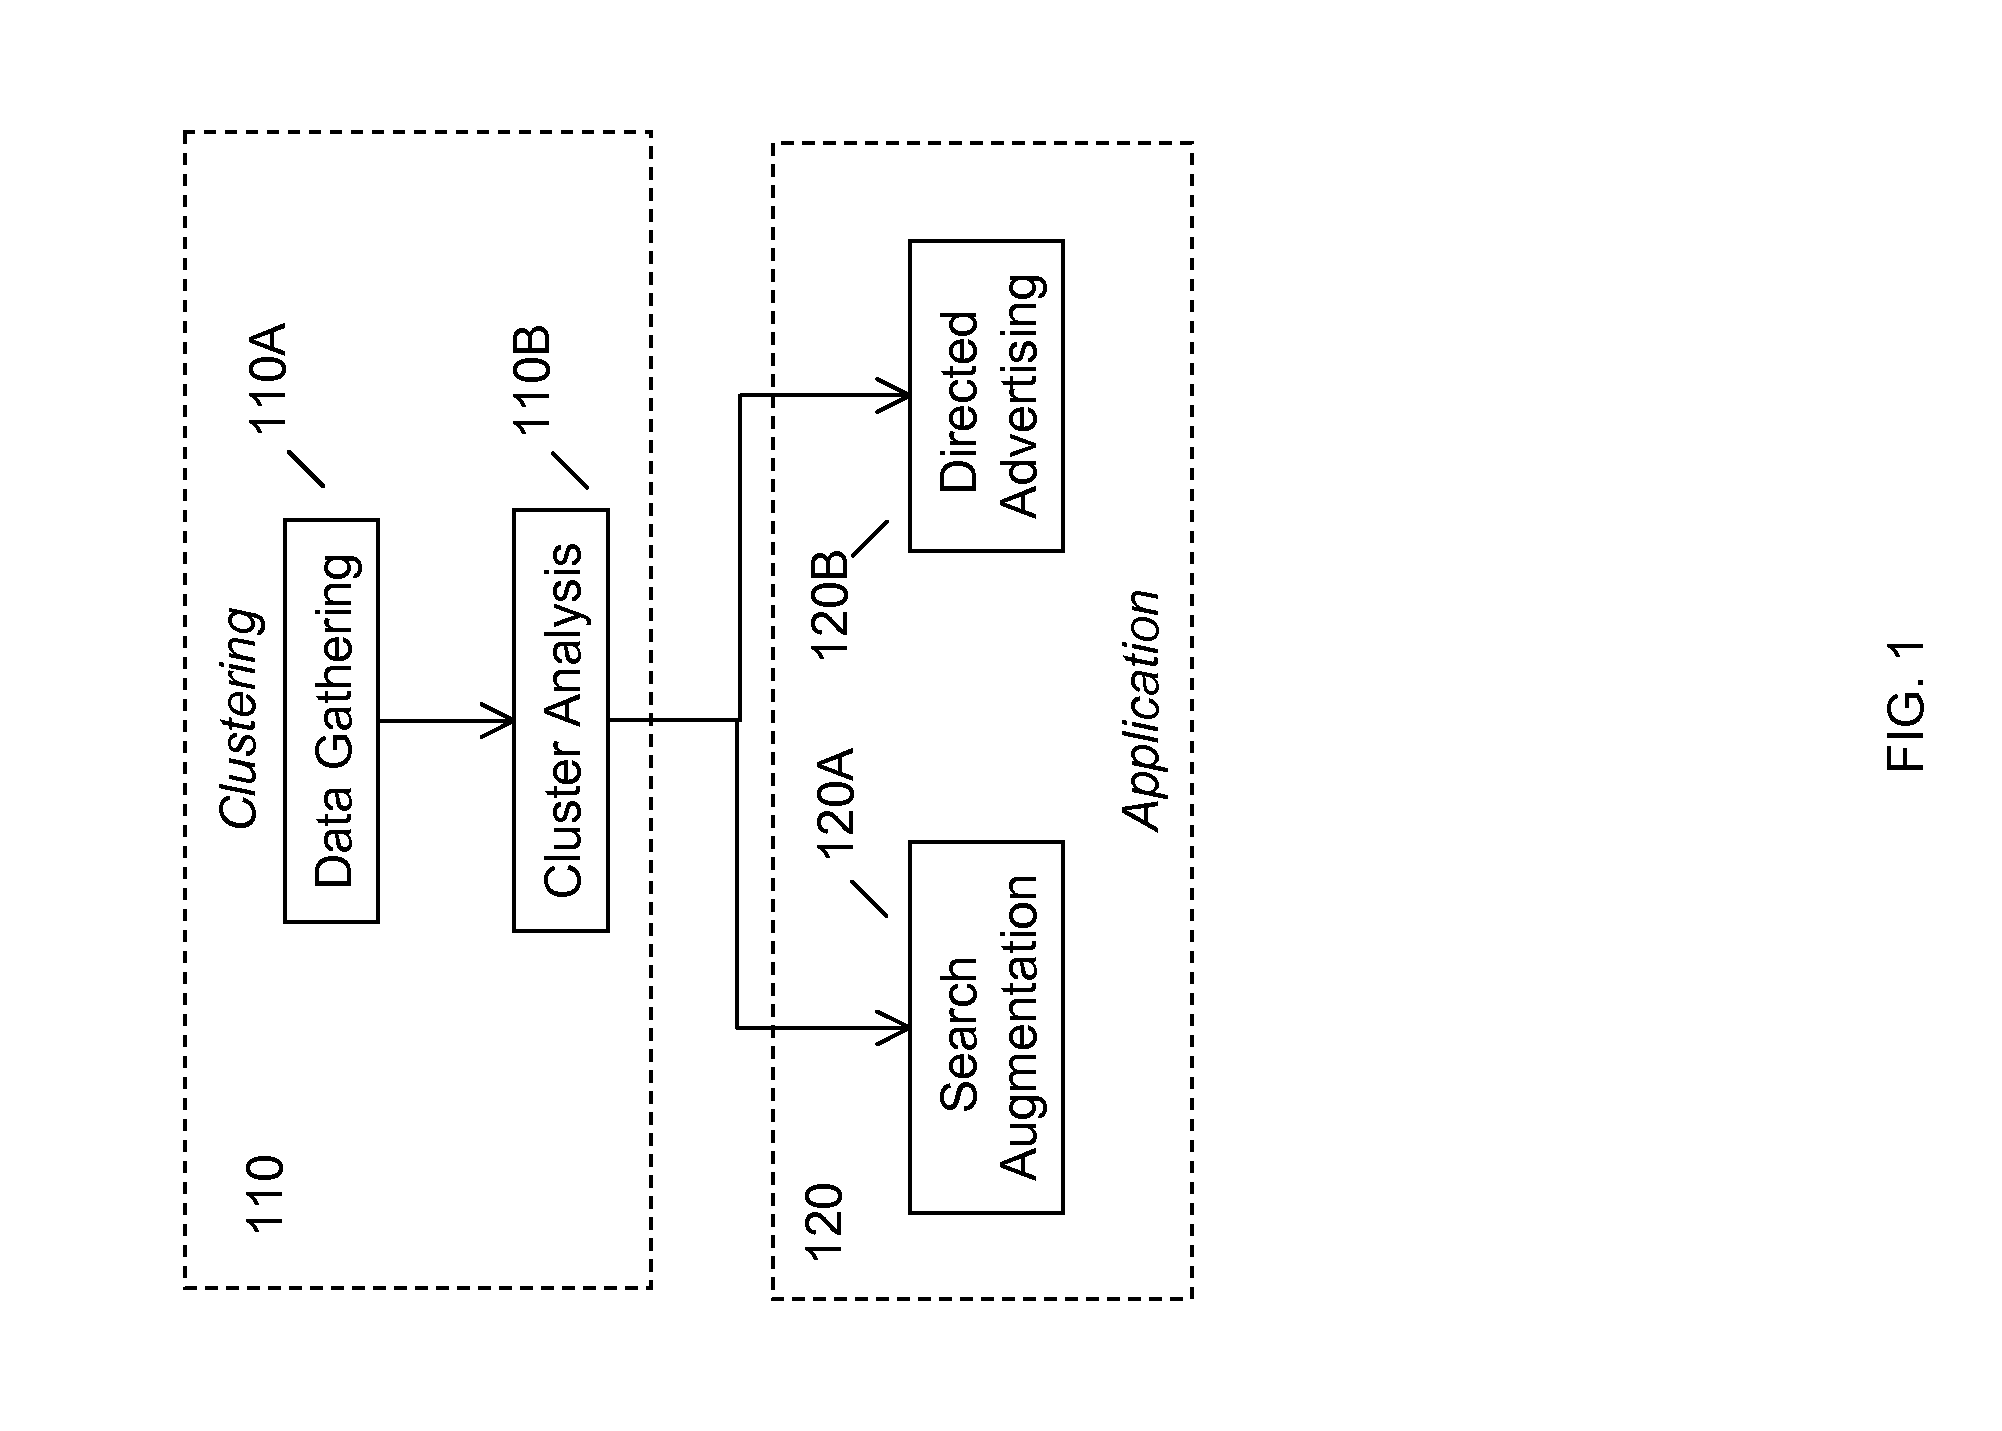 Systems and methods for cluster augmentation of search results